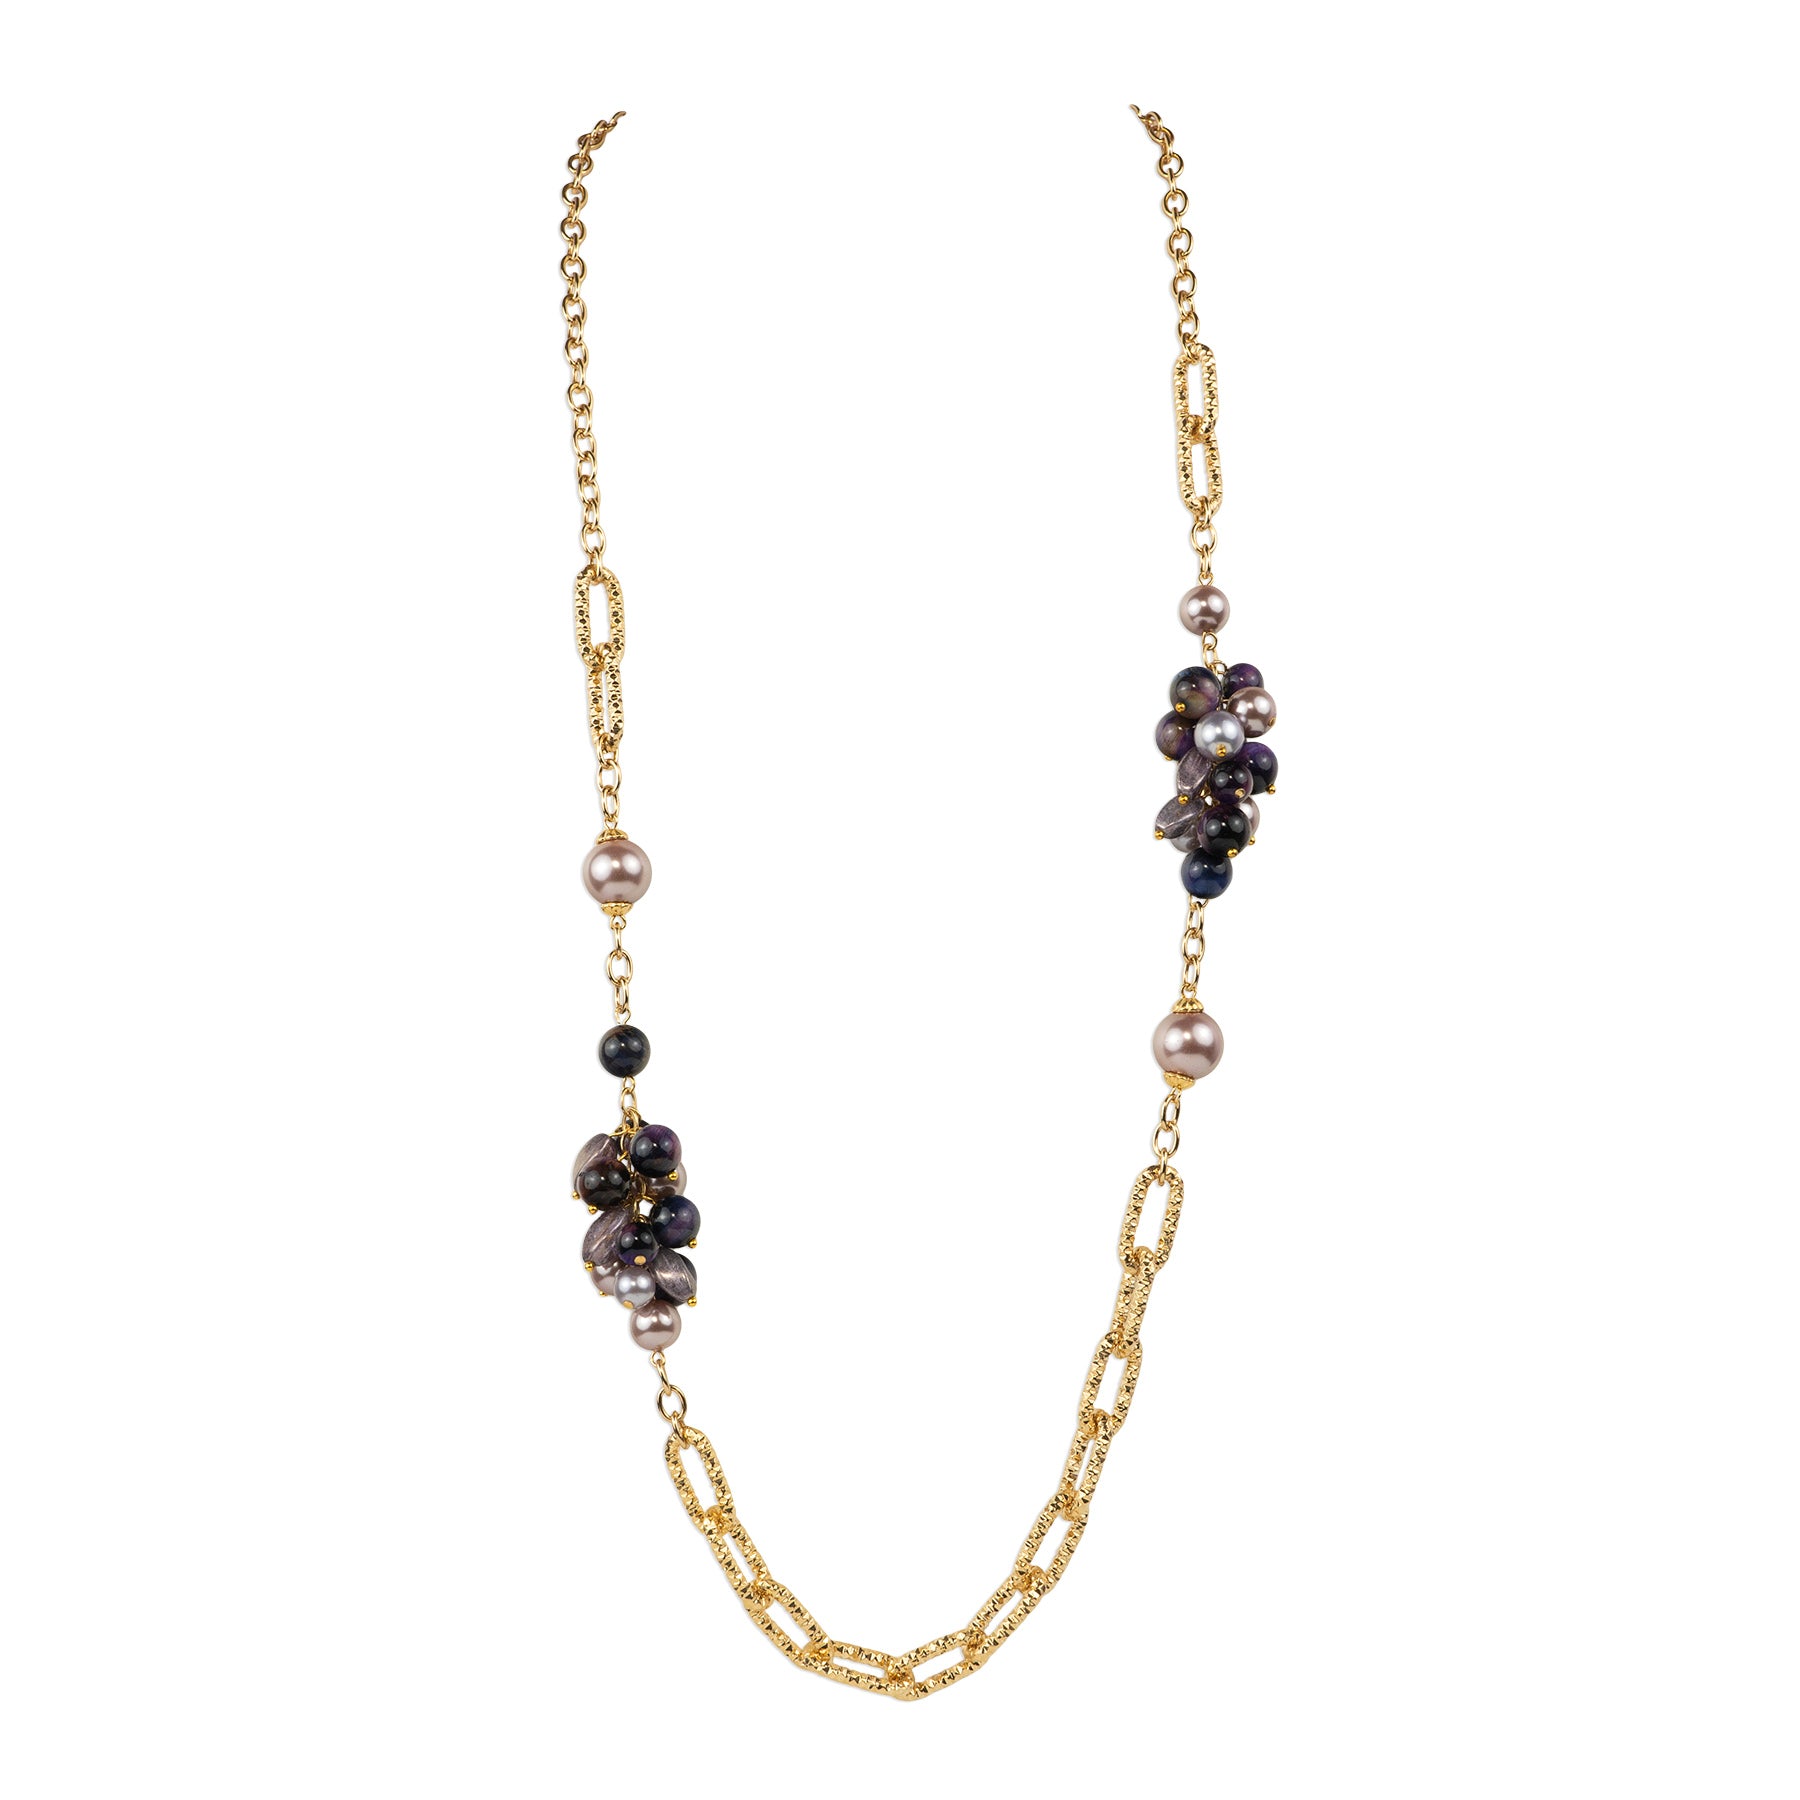 Long chain necklace with a cluster of semi-precious stones and pearls